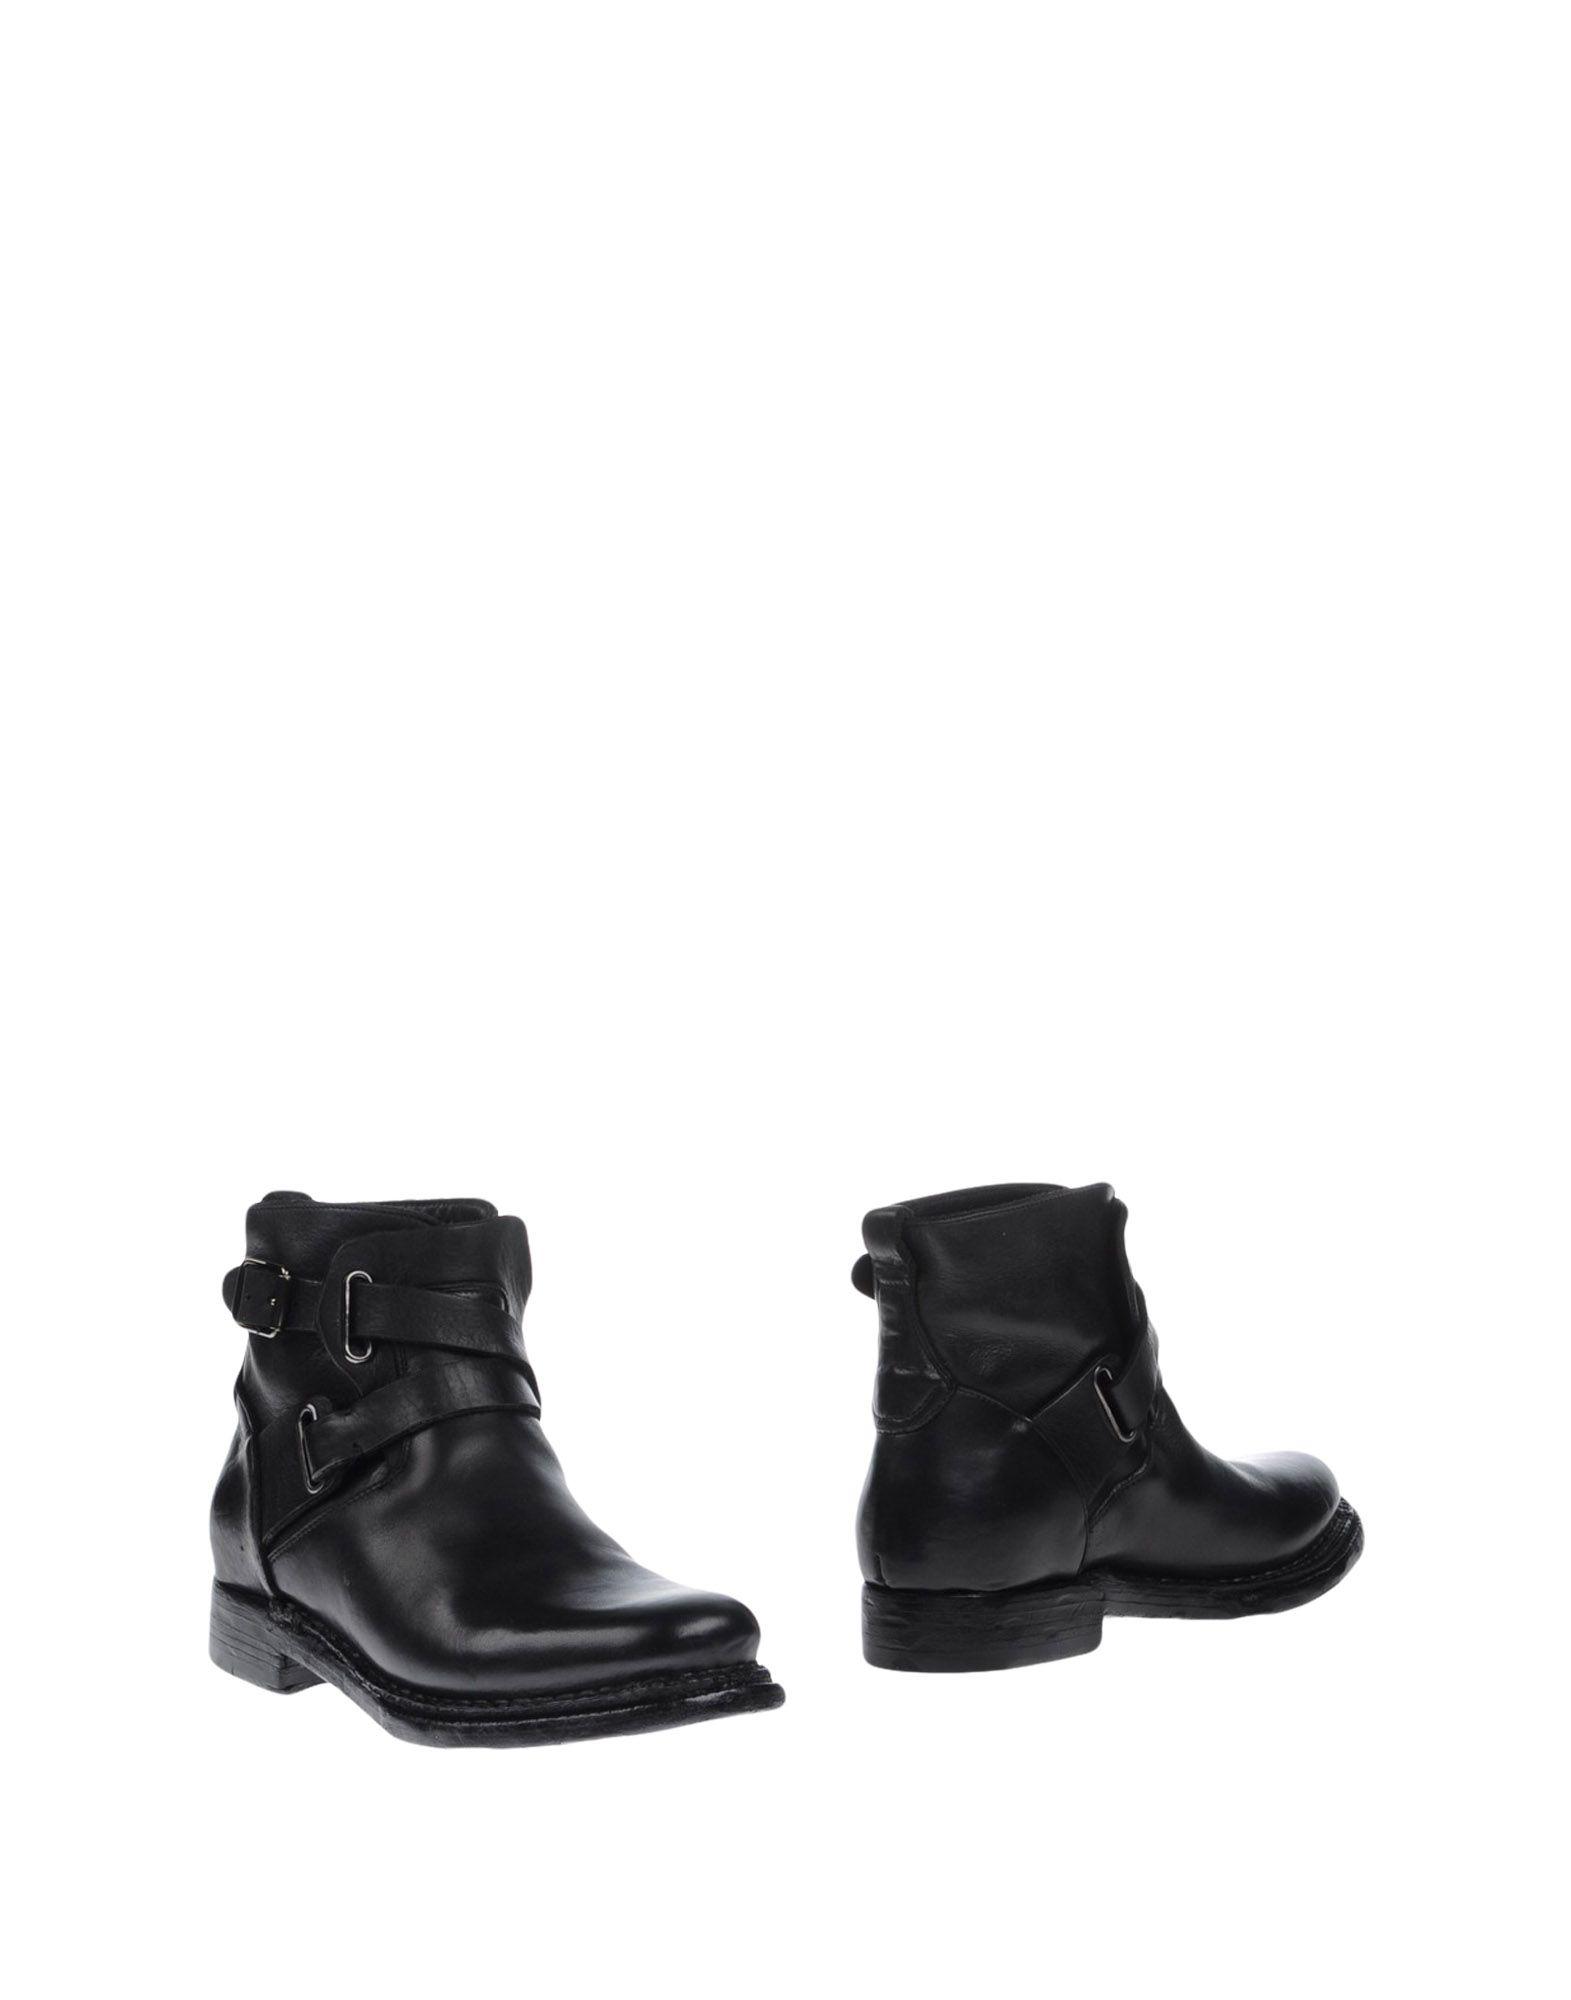 Silvano sassetti Ankle Boots in Black | Lyst